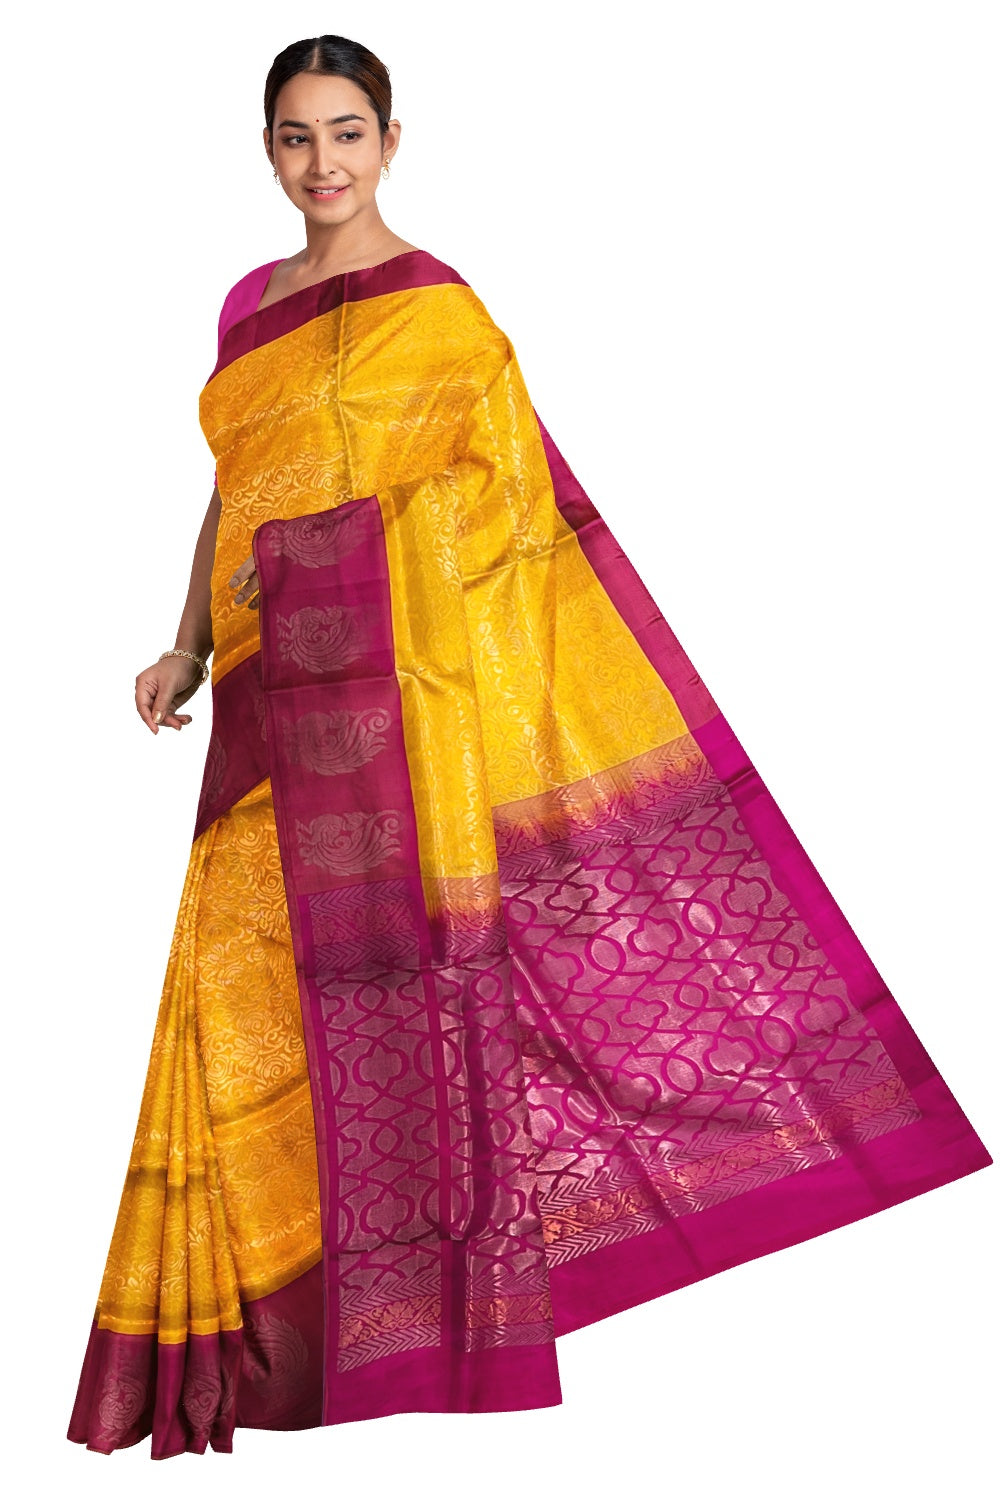 Southloom Handloom Pure Silk Kanchipuram Saree with Floral Work on Yellow Body and Rose Blouse Piece